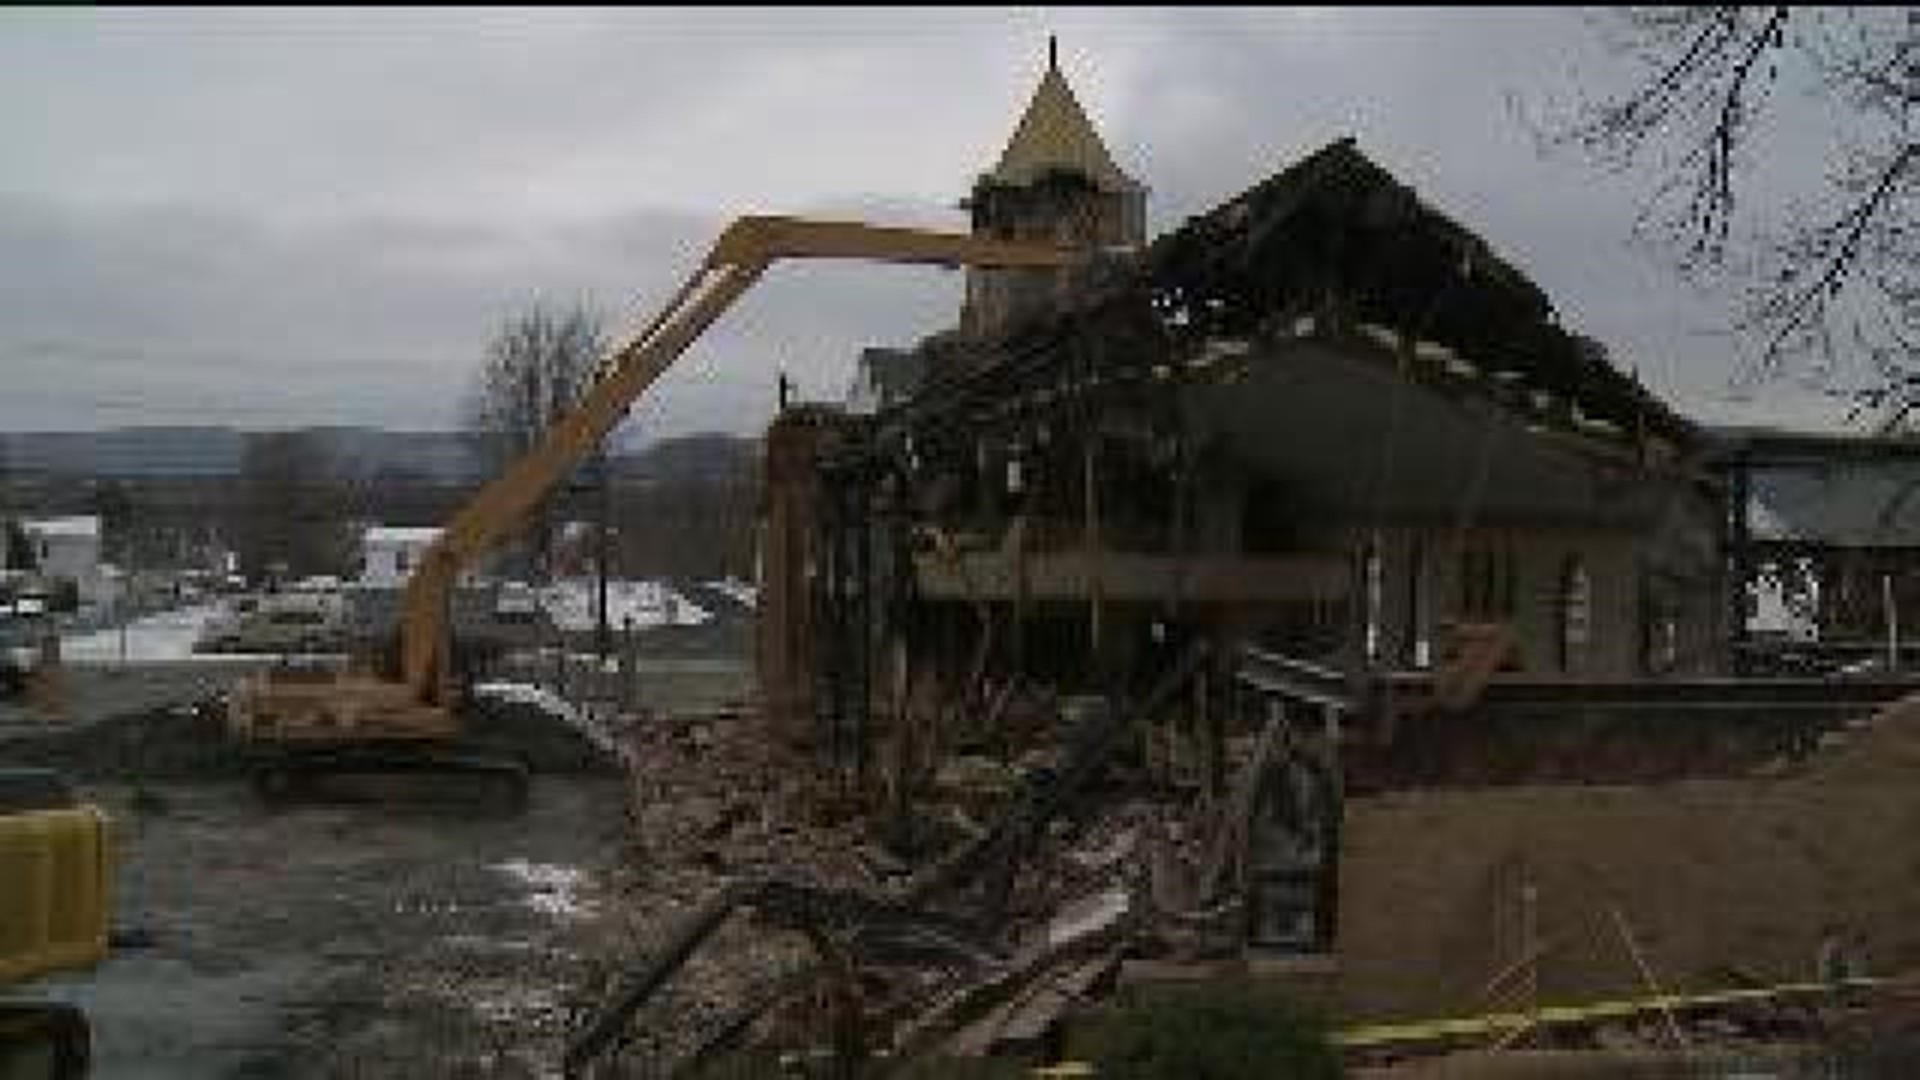 Church Coming Down To Make Way For Borough Building